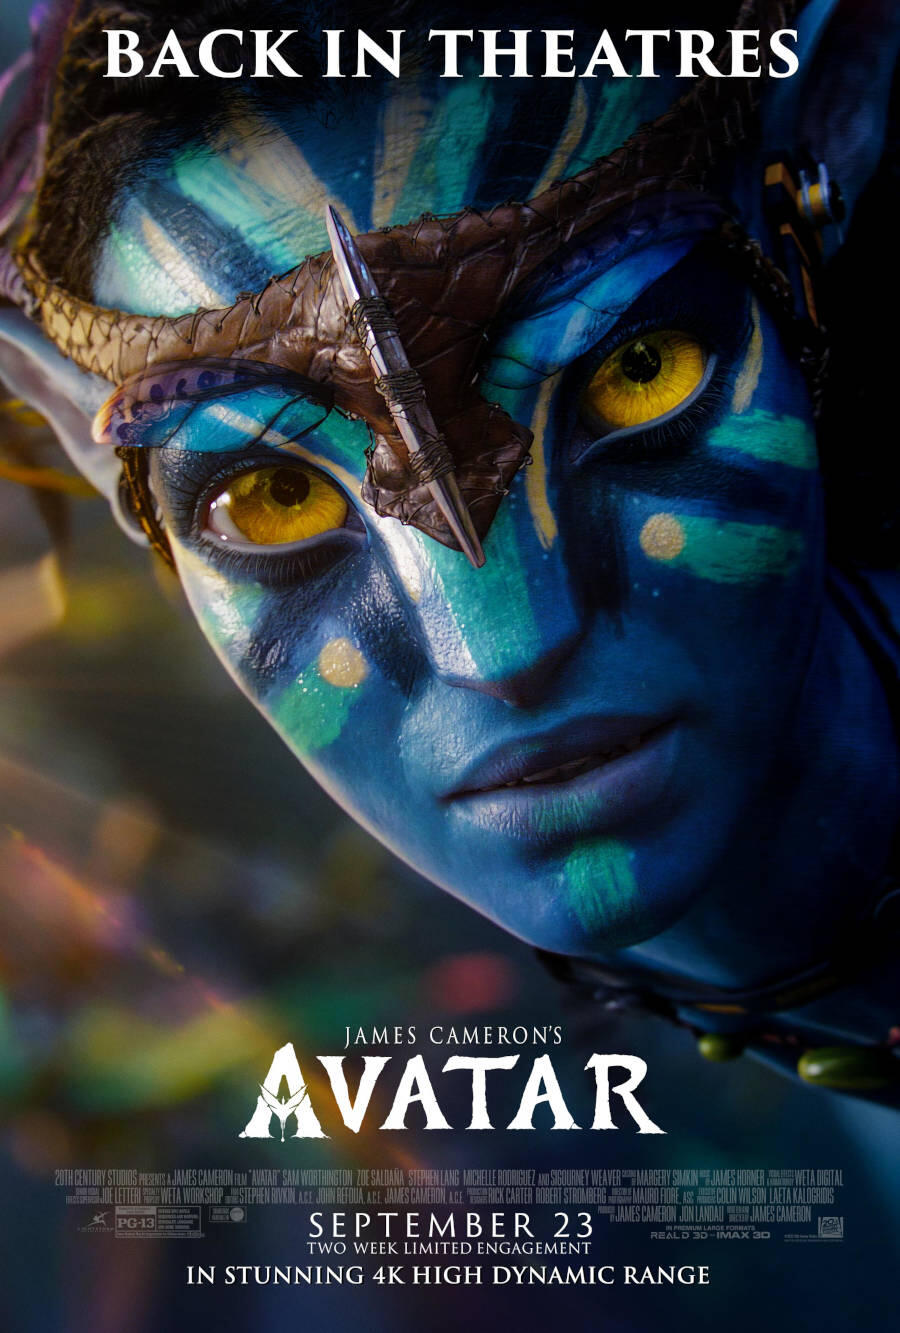 Avatar The Next Shadow Comic Book Will Fill The Gap Between Avatar 2  And The Original Movie